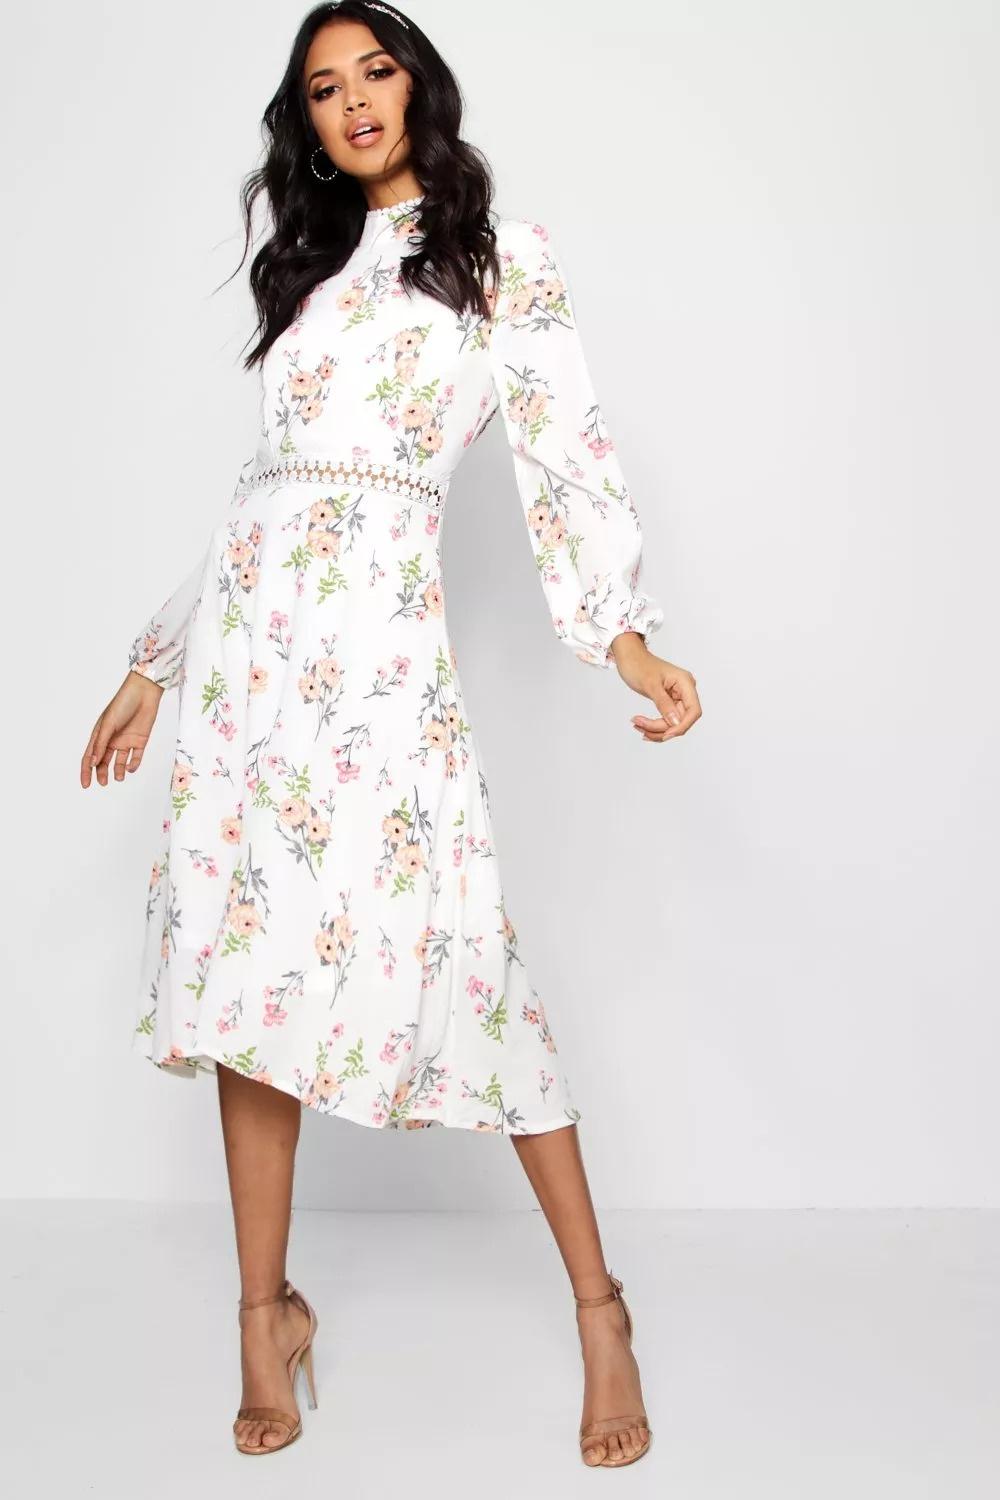 Model wearing a floral long sleeved casual wedding dress